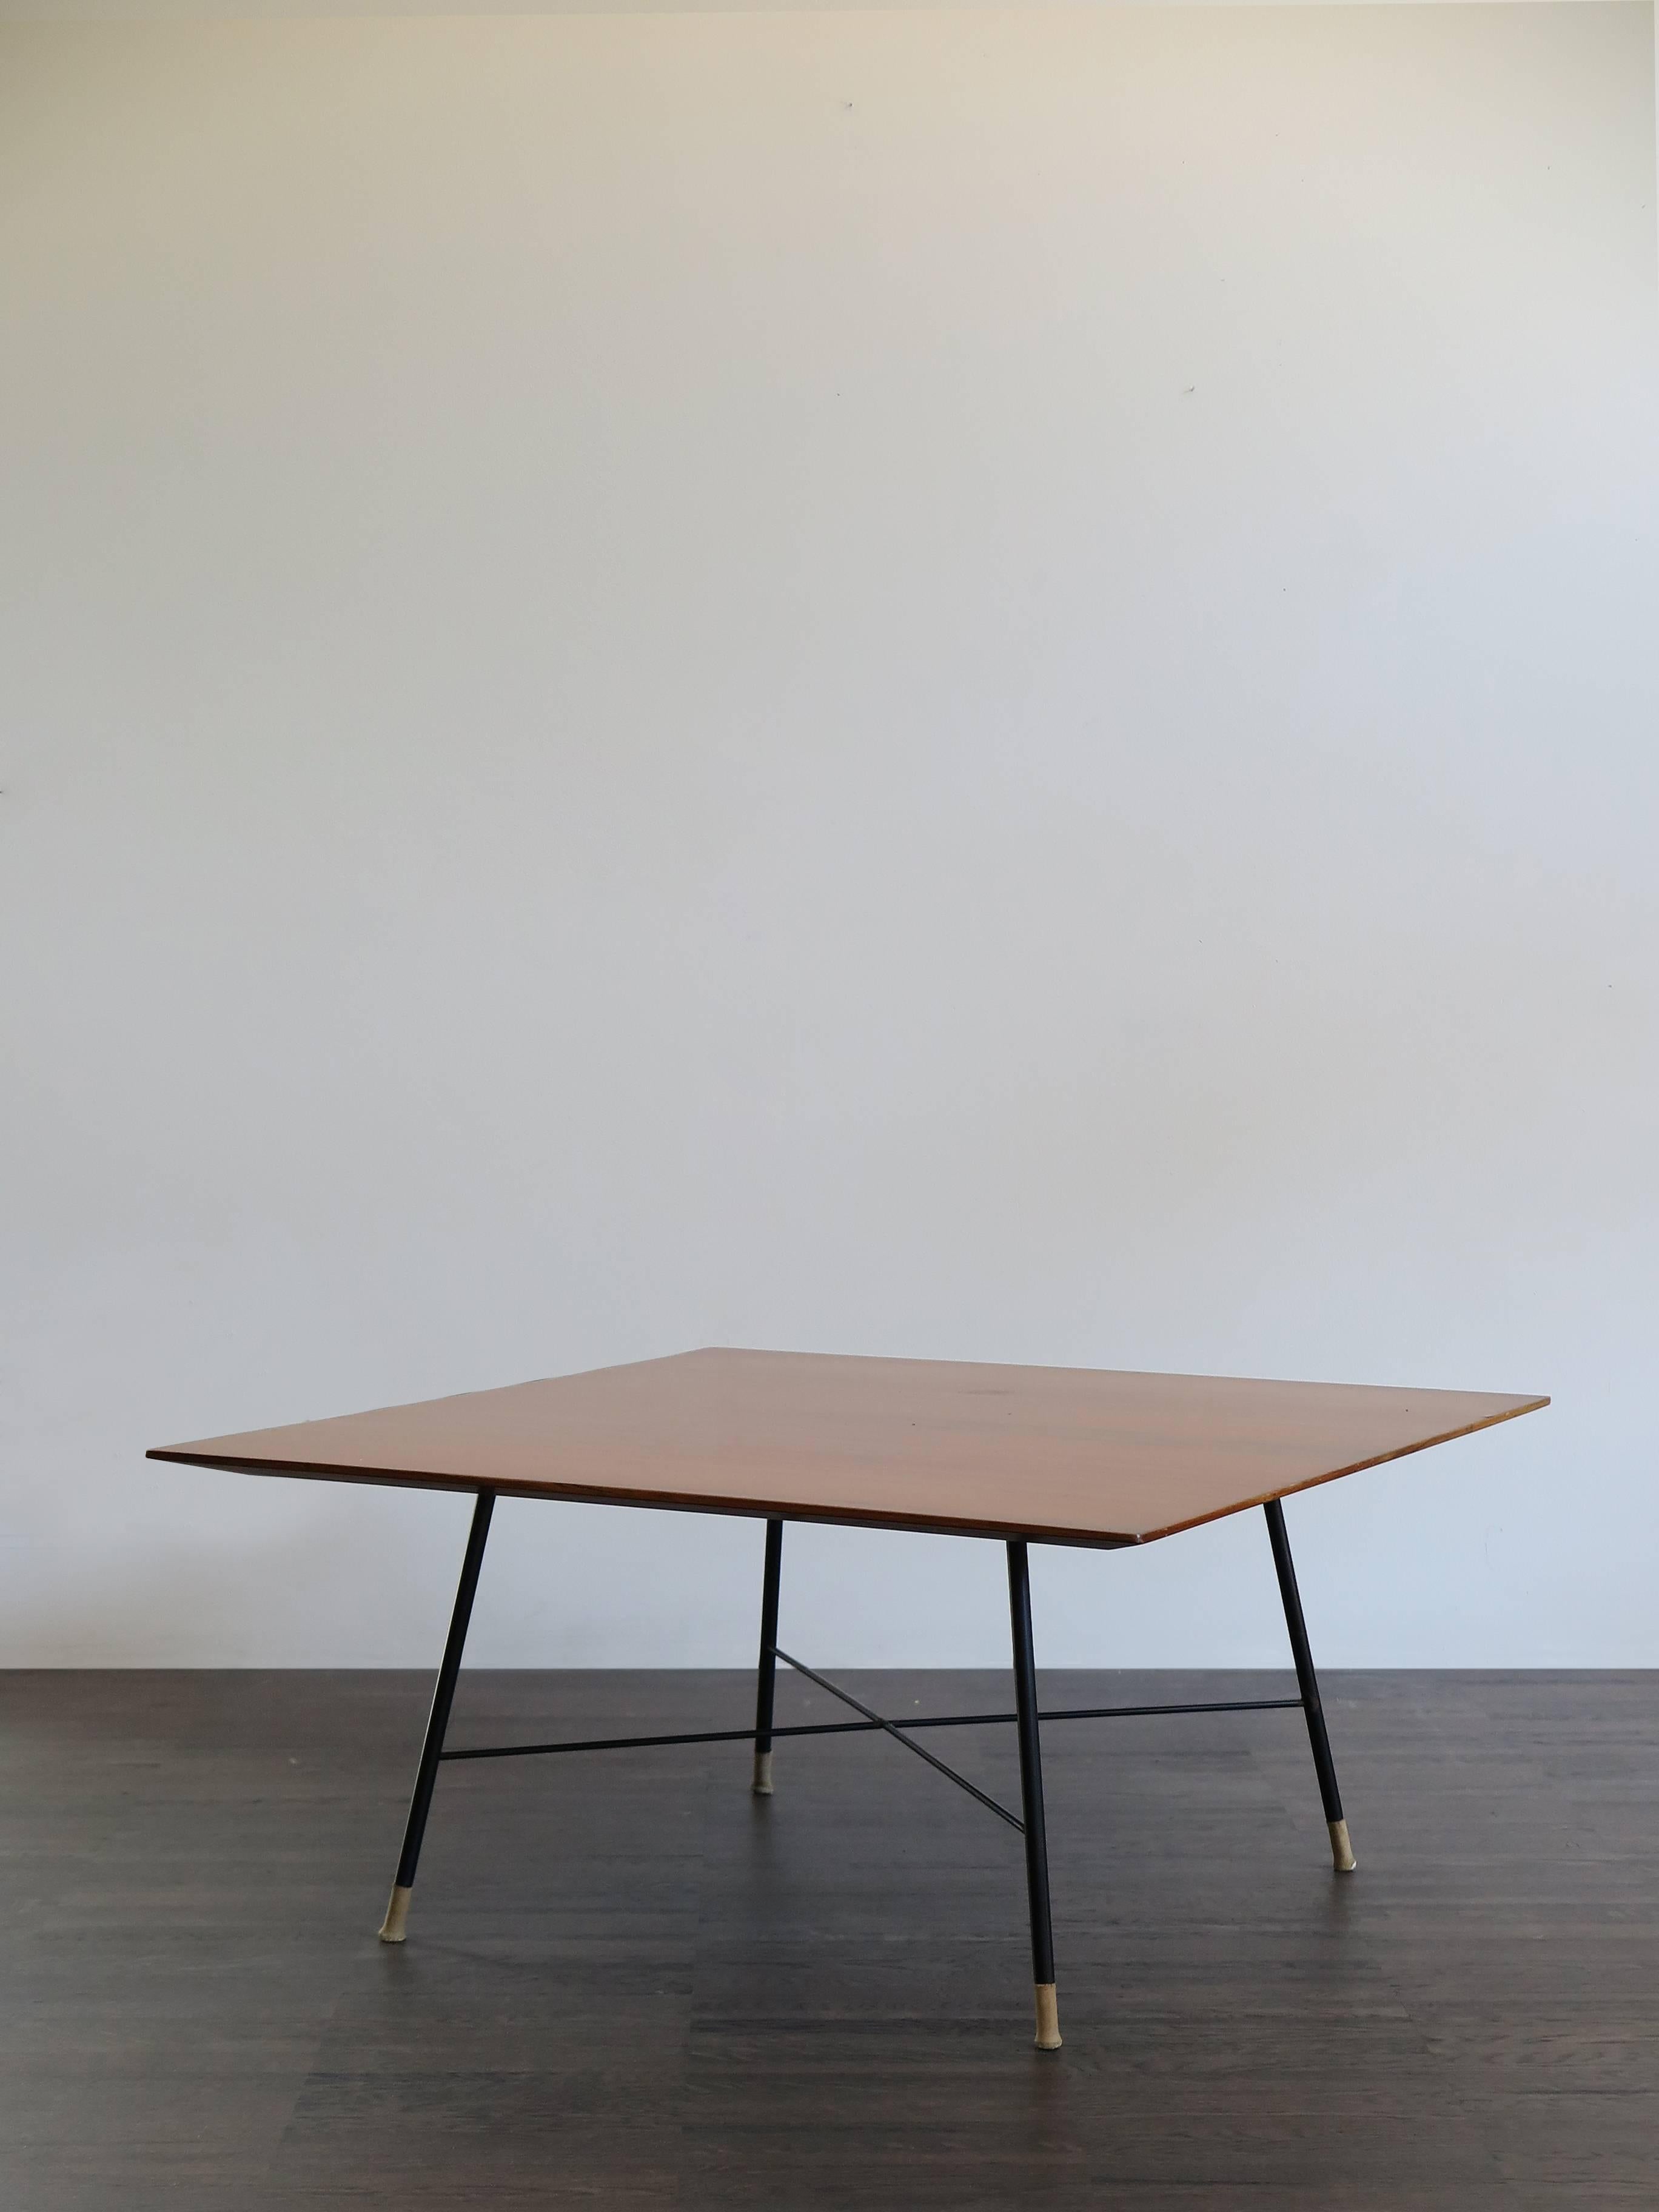 Italian midcentury walnut coffee table designed by Ico Parisi for Cassina with varnished metal frame and veneer top in walnut wood, circa 1950s.